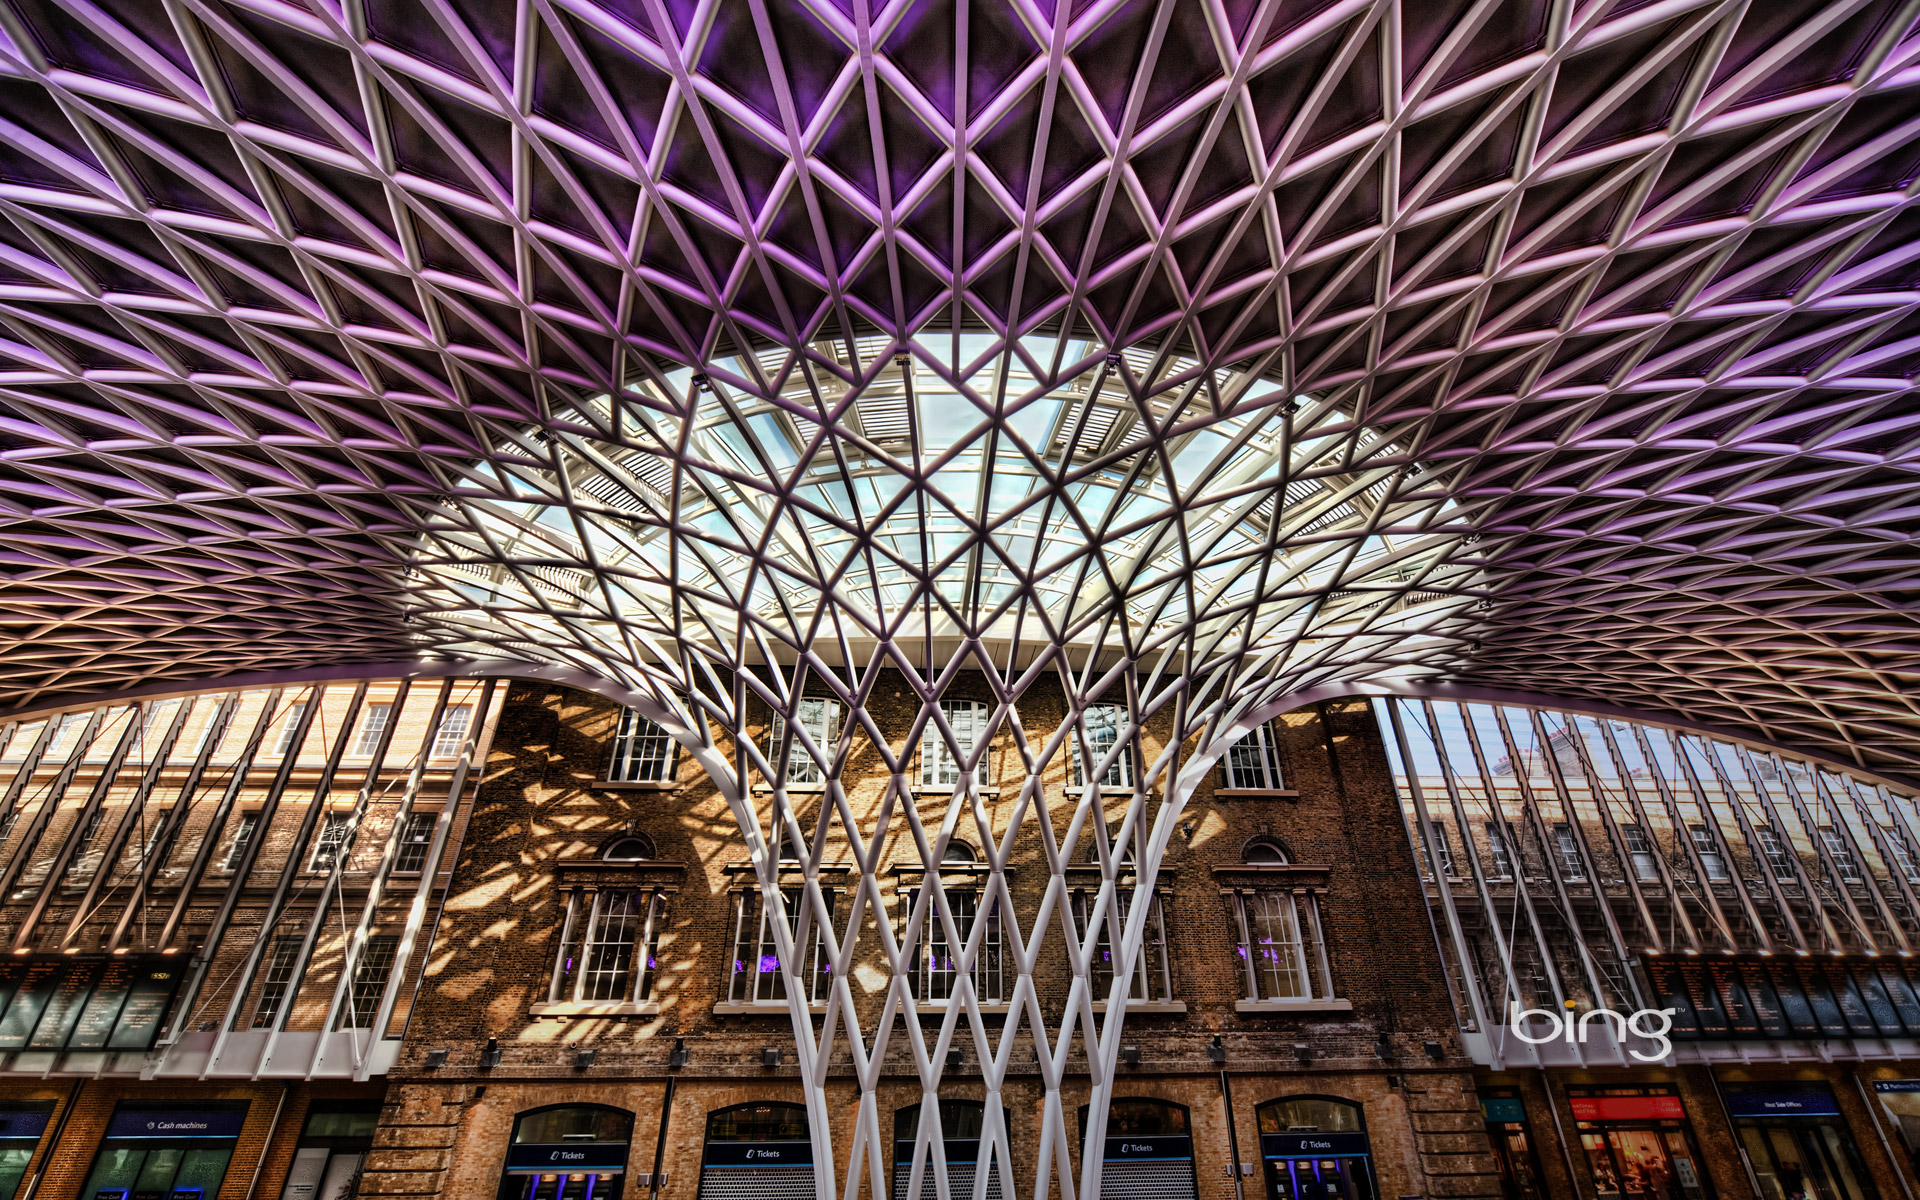 Western Concourse at King‘s Cross station, London, England